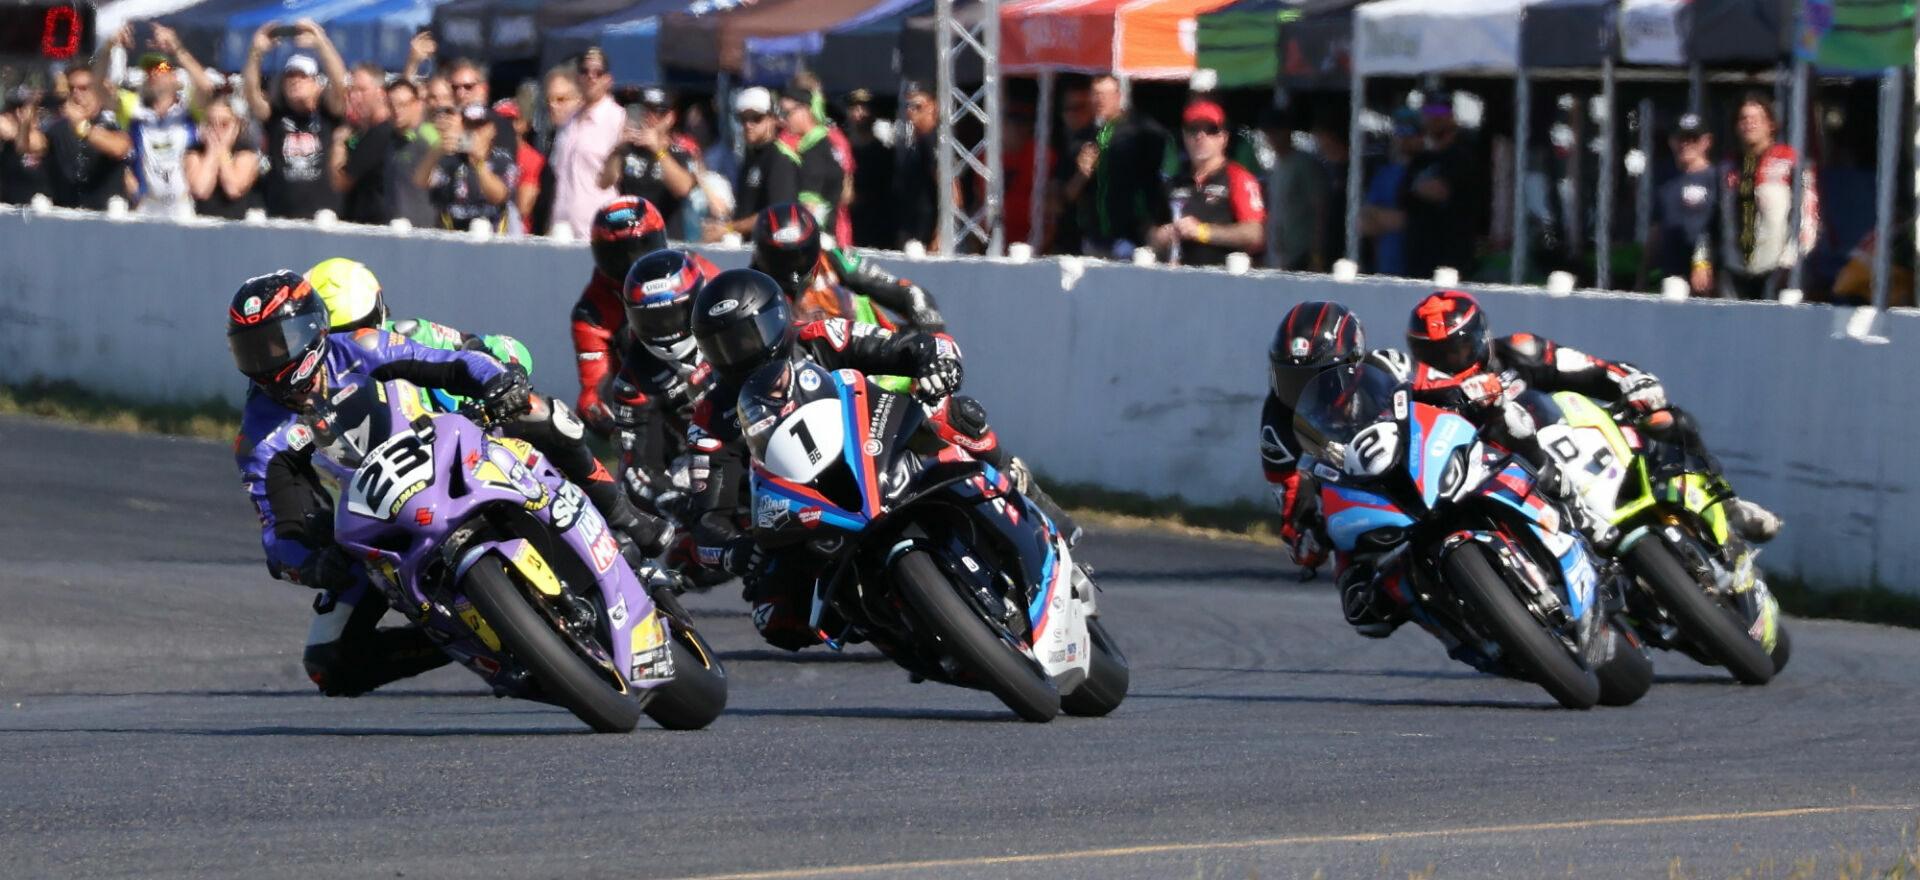 French-Canadian fans will soon have dedicated CSBK coverage with the introduction of the series to RDS in 2024. The Bridgestone Canadian Superbike Championship also returns to TSN next season with a total of 24 episodes planned across its sports channels. Photo by Rob O'Brien, courtesy CSBK.